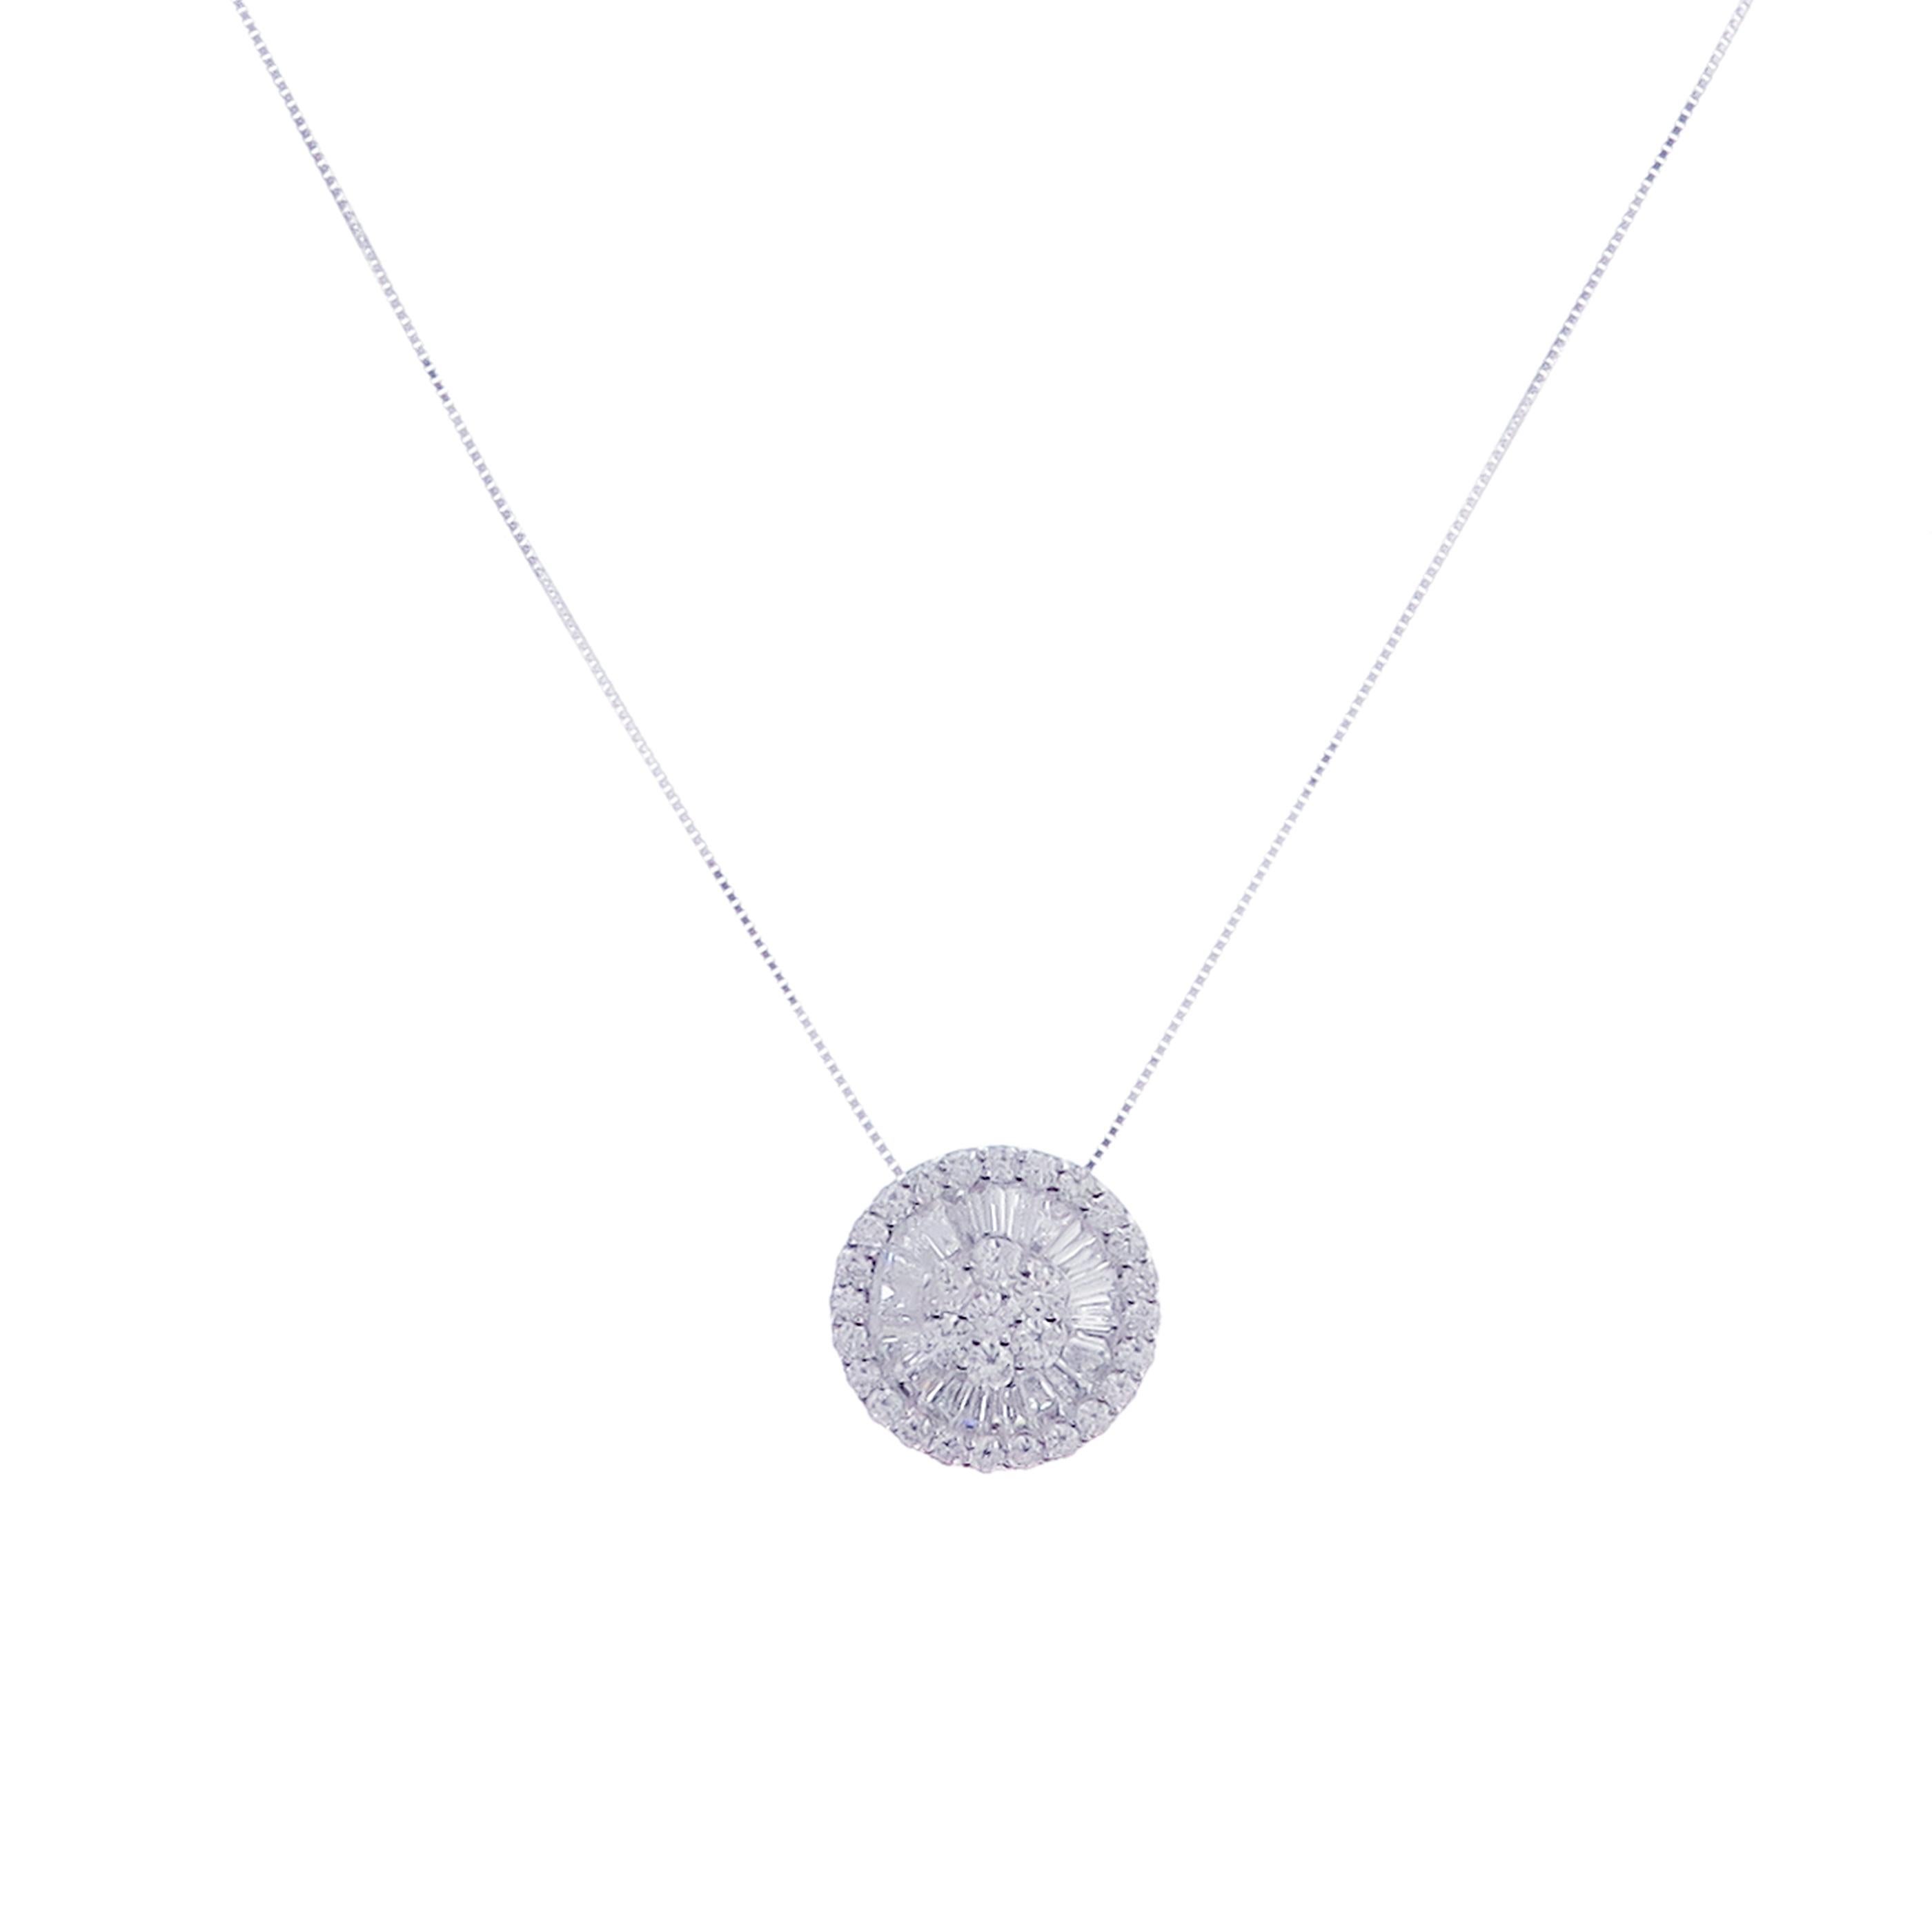 This pisa necklace is crafted in 18-karat white gold, weighing approximately 2.11 total carats of SI-V Quality white diamond. 

Necklace is 16